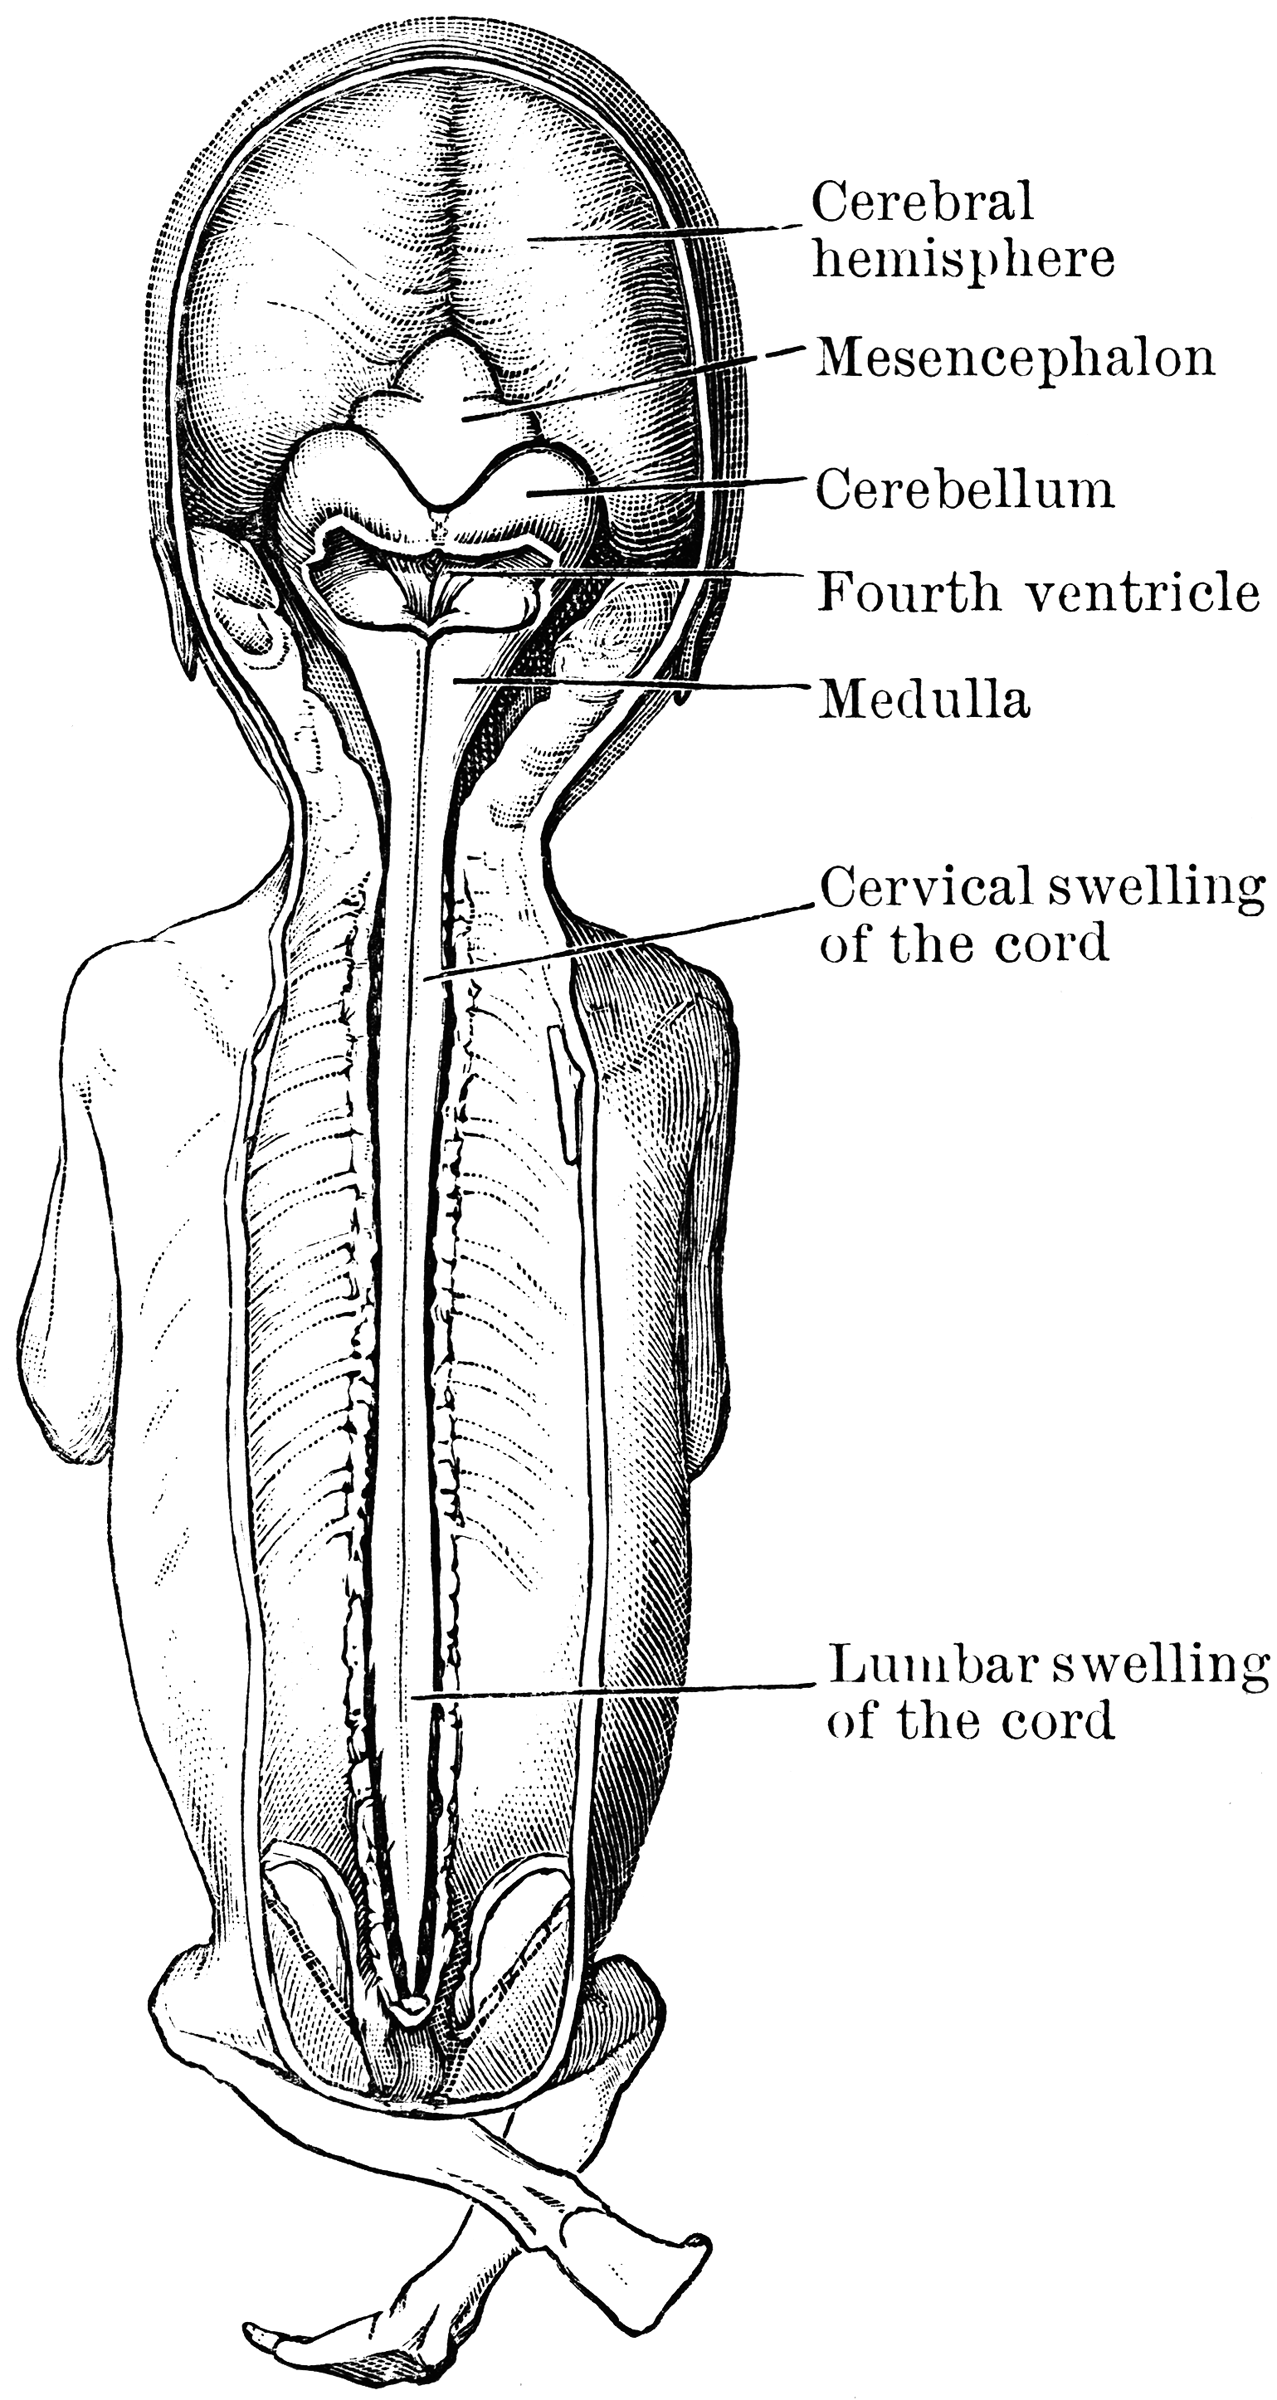 Brain and Spinal Cord of Fetus | ClipArt ETC